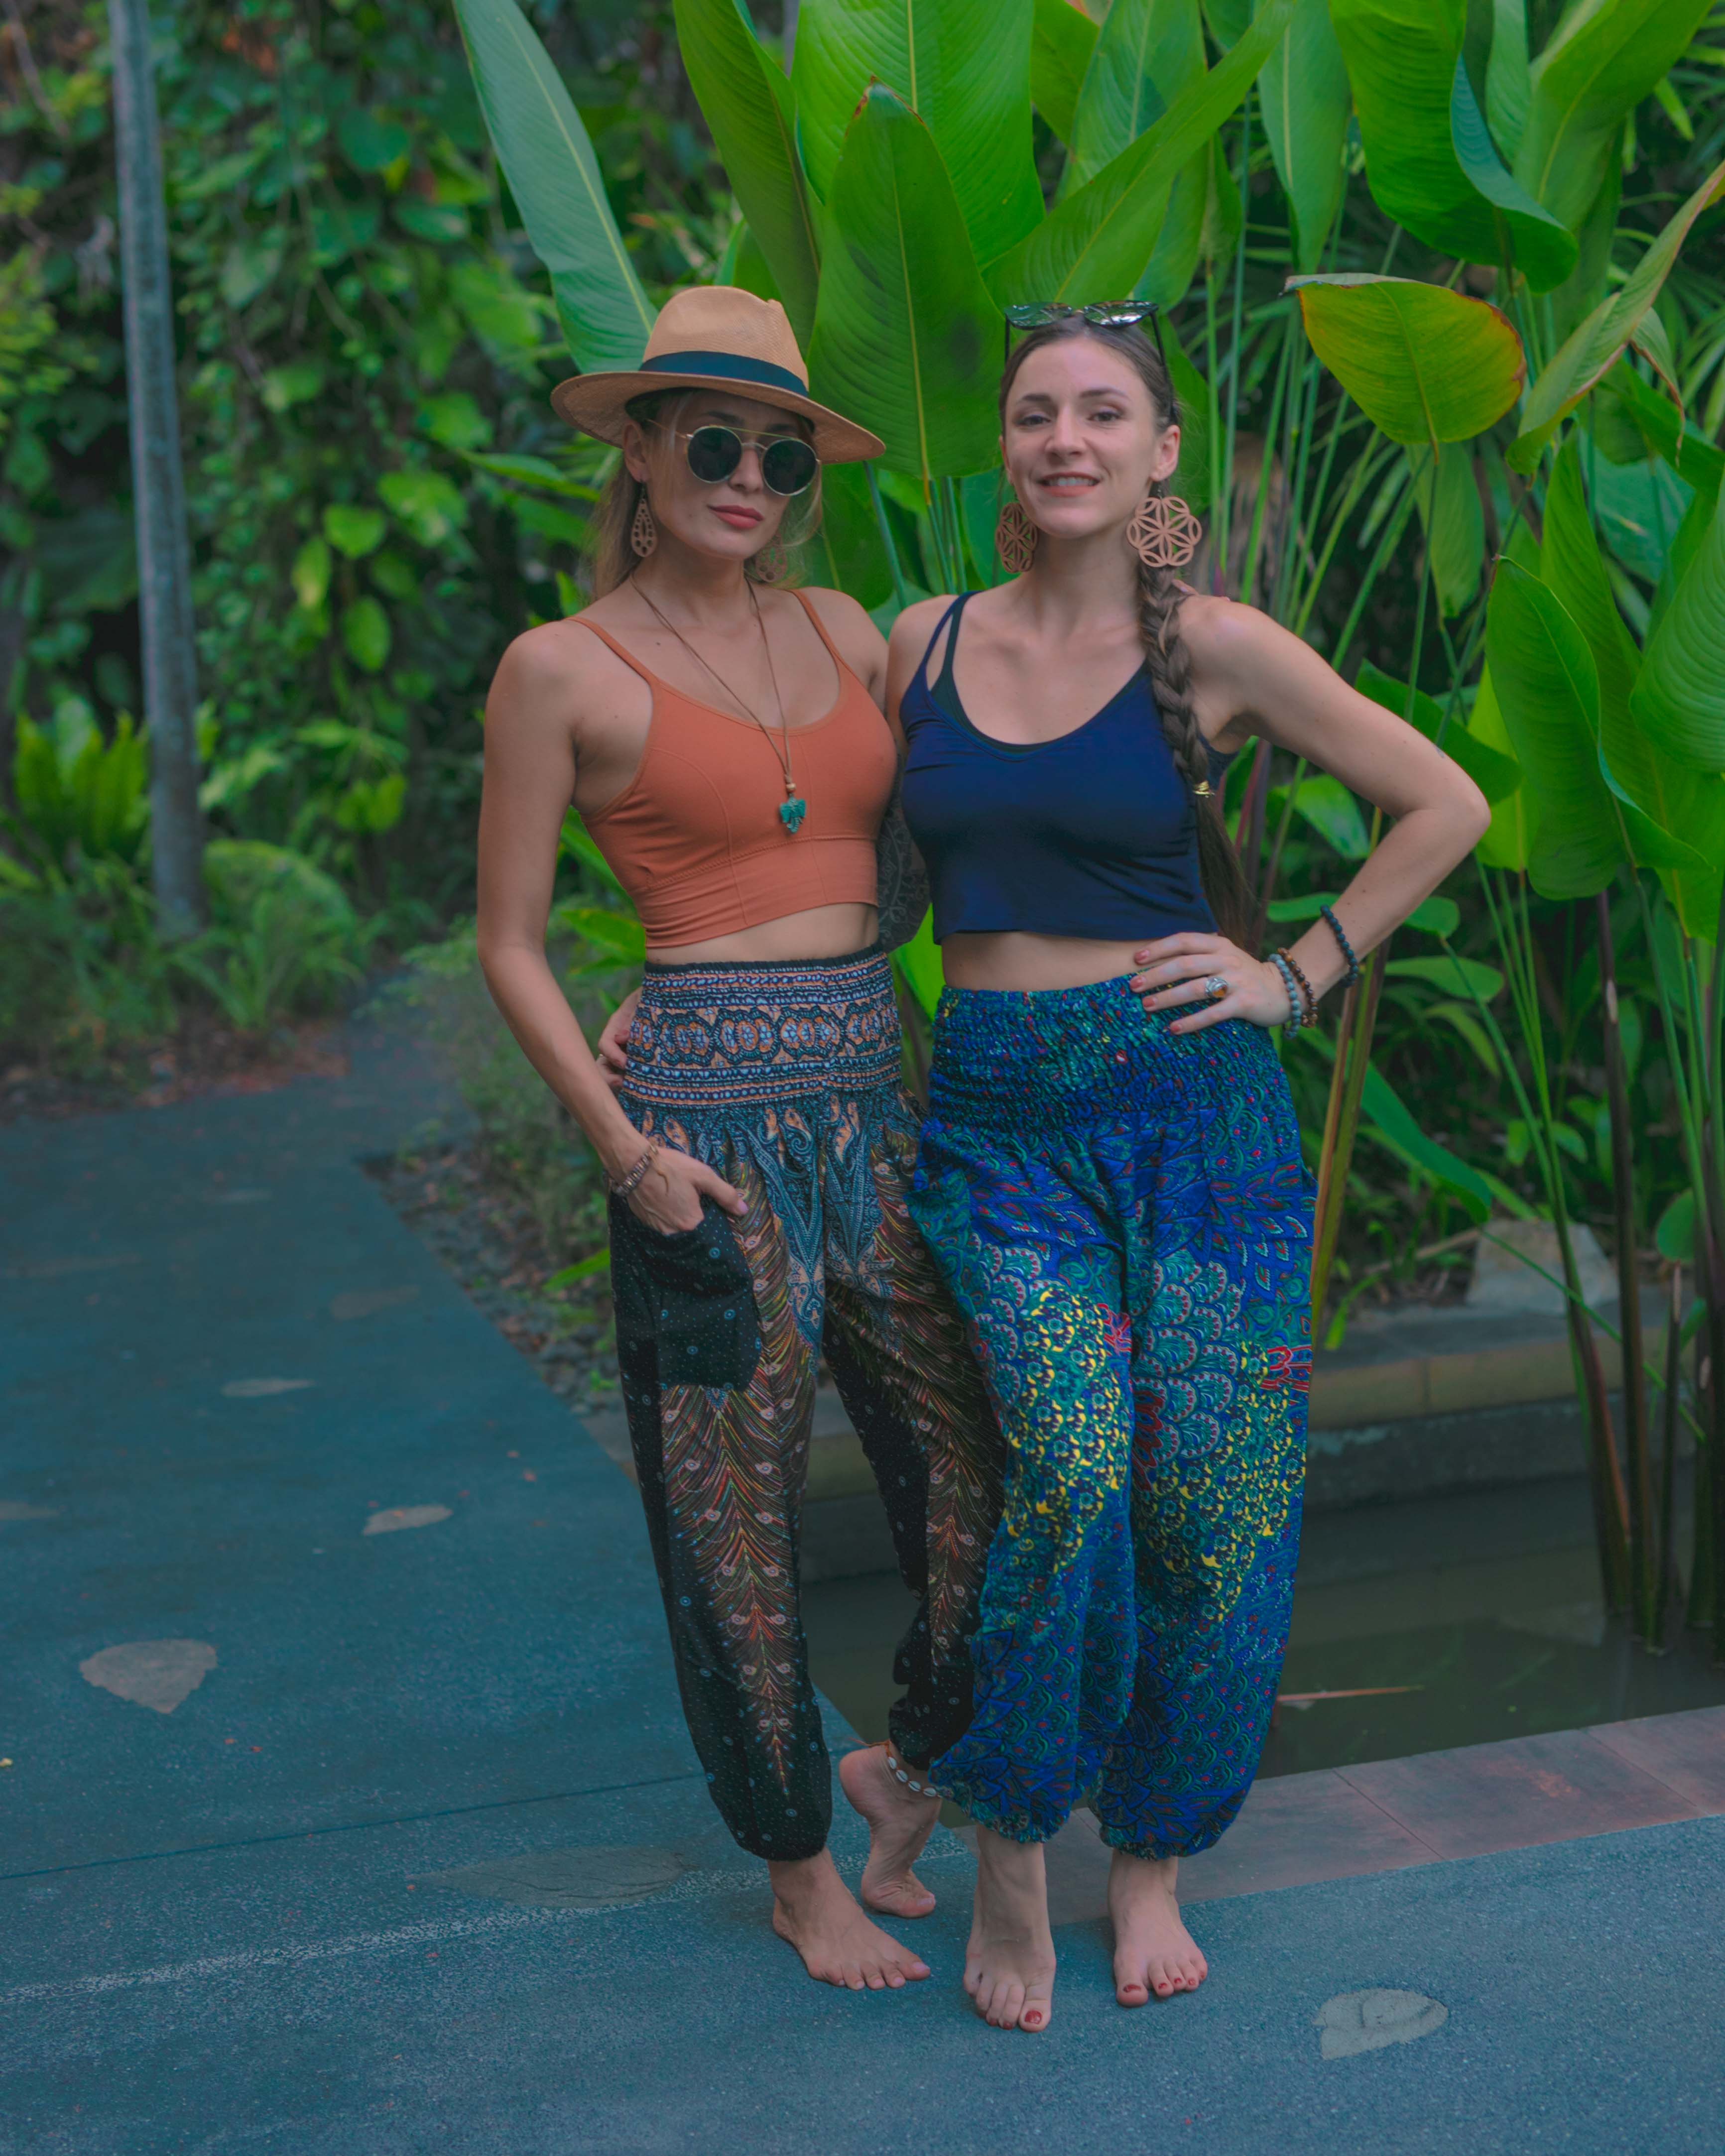 Harem Pants - Buy Today Elephant Pants Jewelry And Bohemian Clothes Handmade In Thailand Help To Save The Elephants FairTrade And Vegan